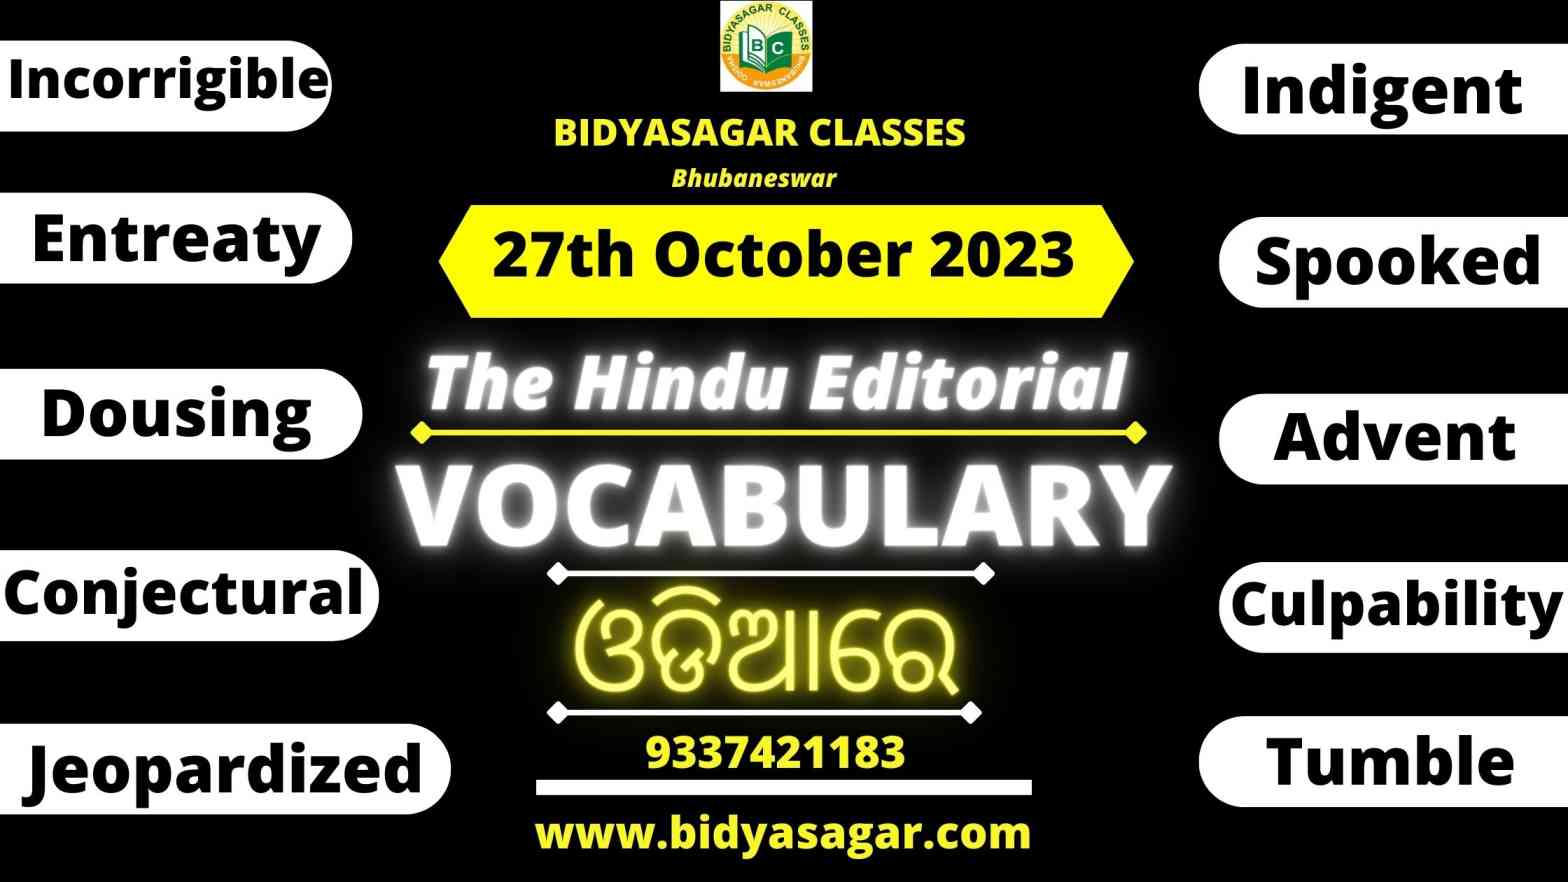 The Hindu Editorial Vocabulary of 27th October 2023